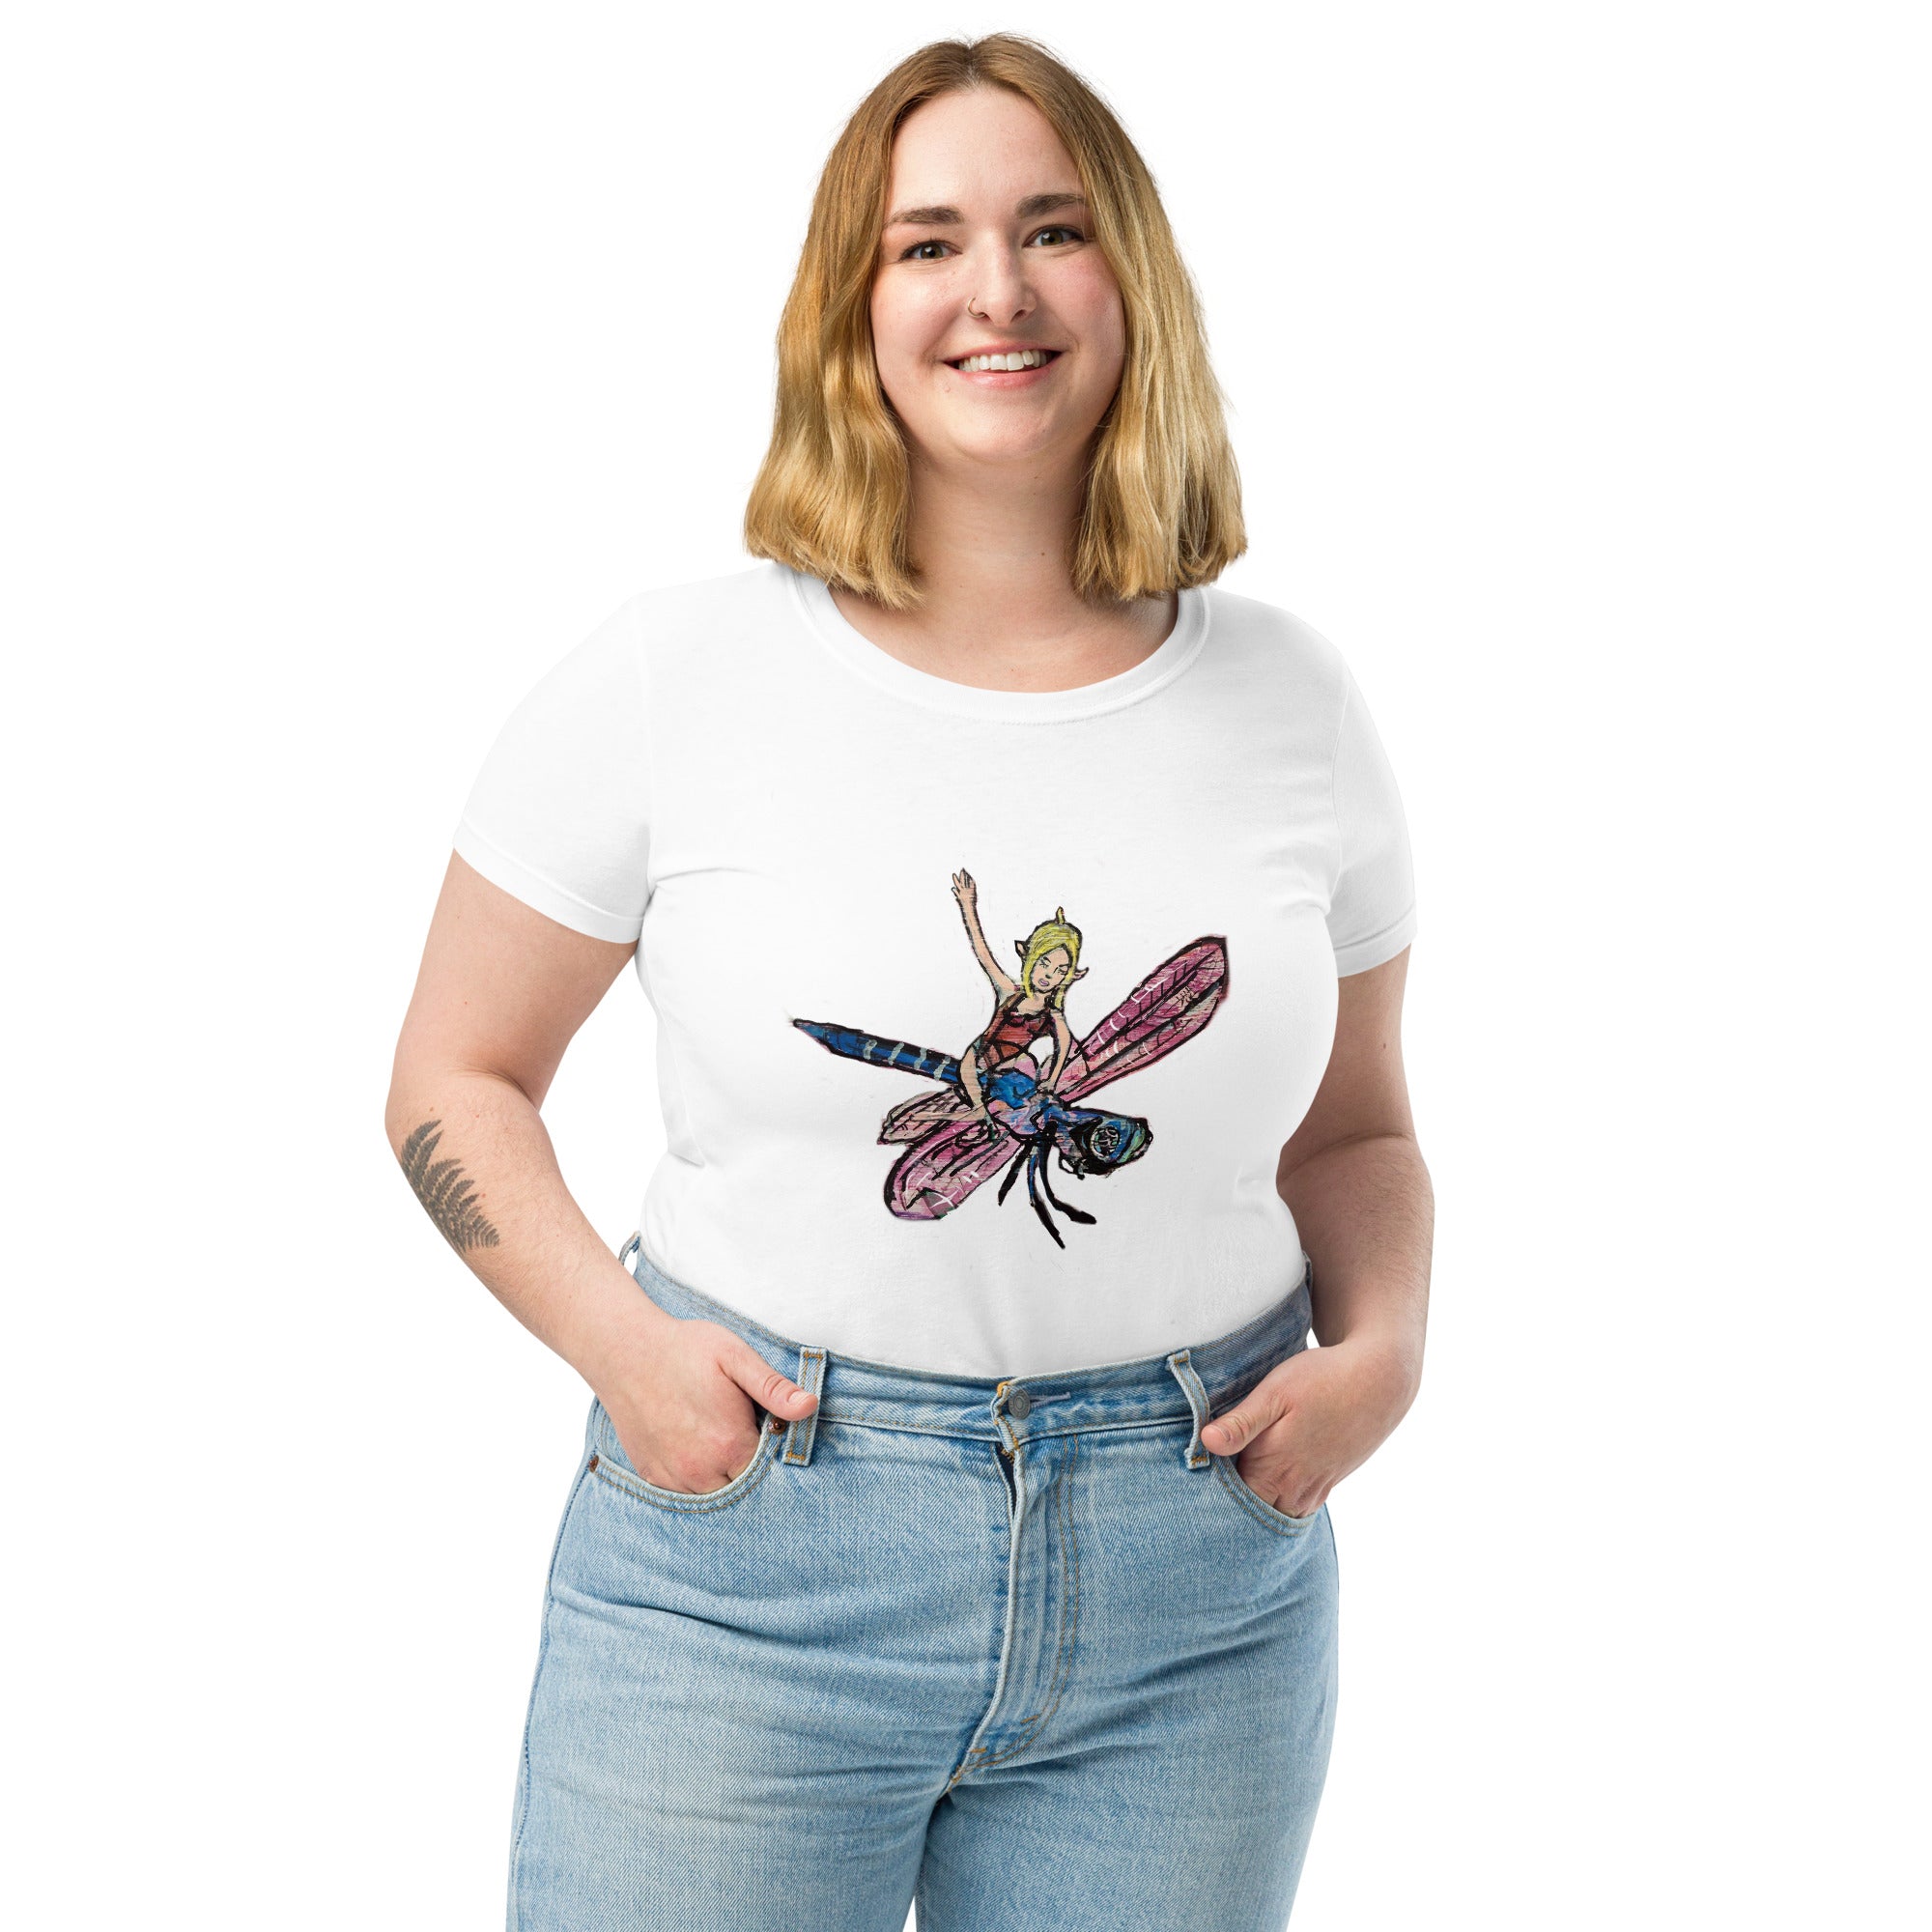 Mrat Women's Casual Tops Clearance Fashion Dragonfly Printing 3/4